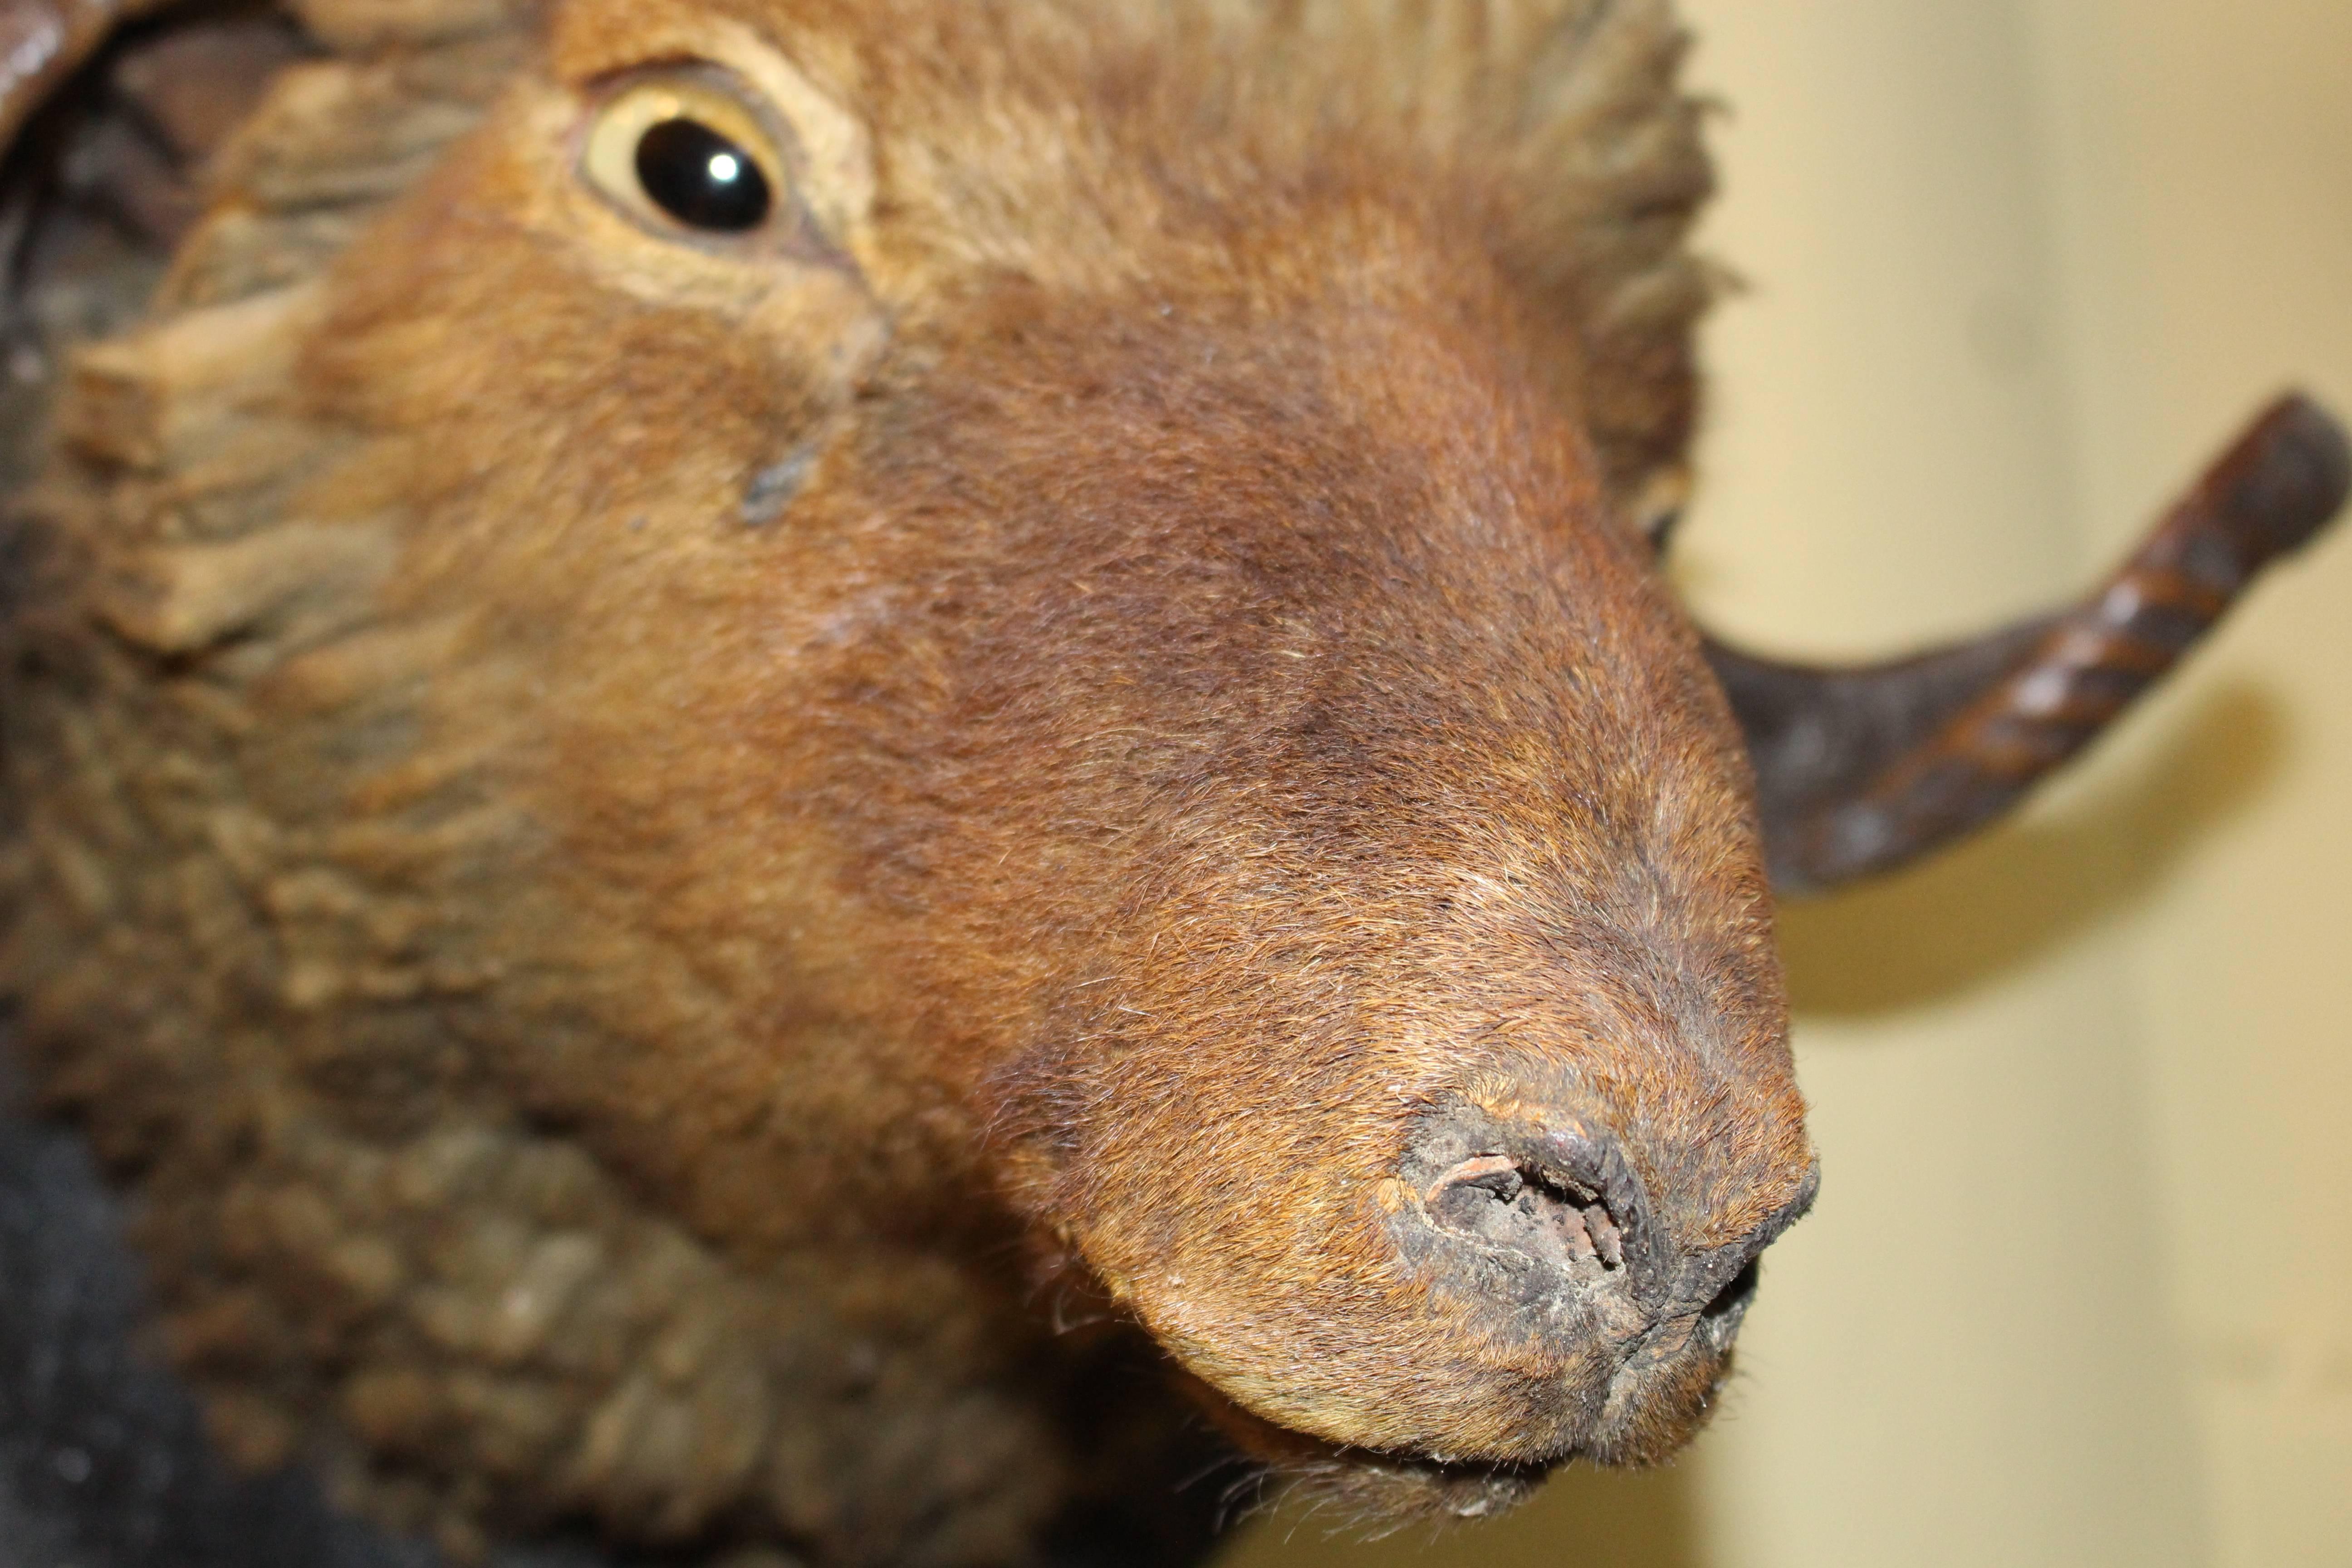 Mounted Antique Ram's Head Taxidermy 1